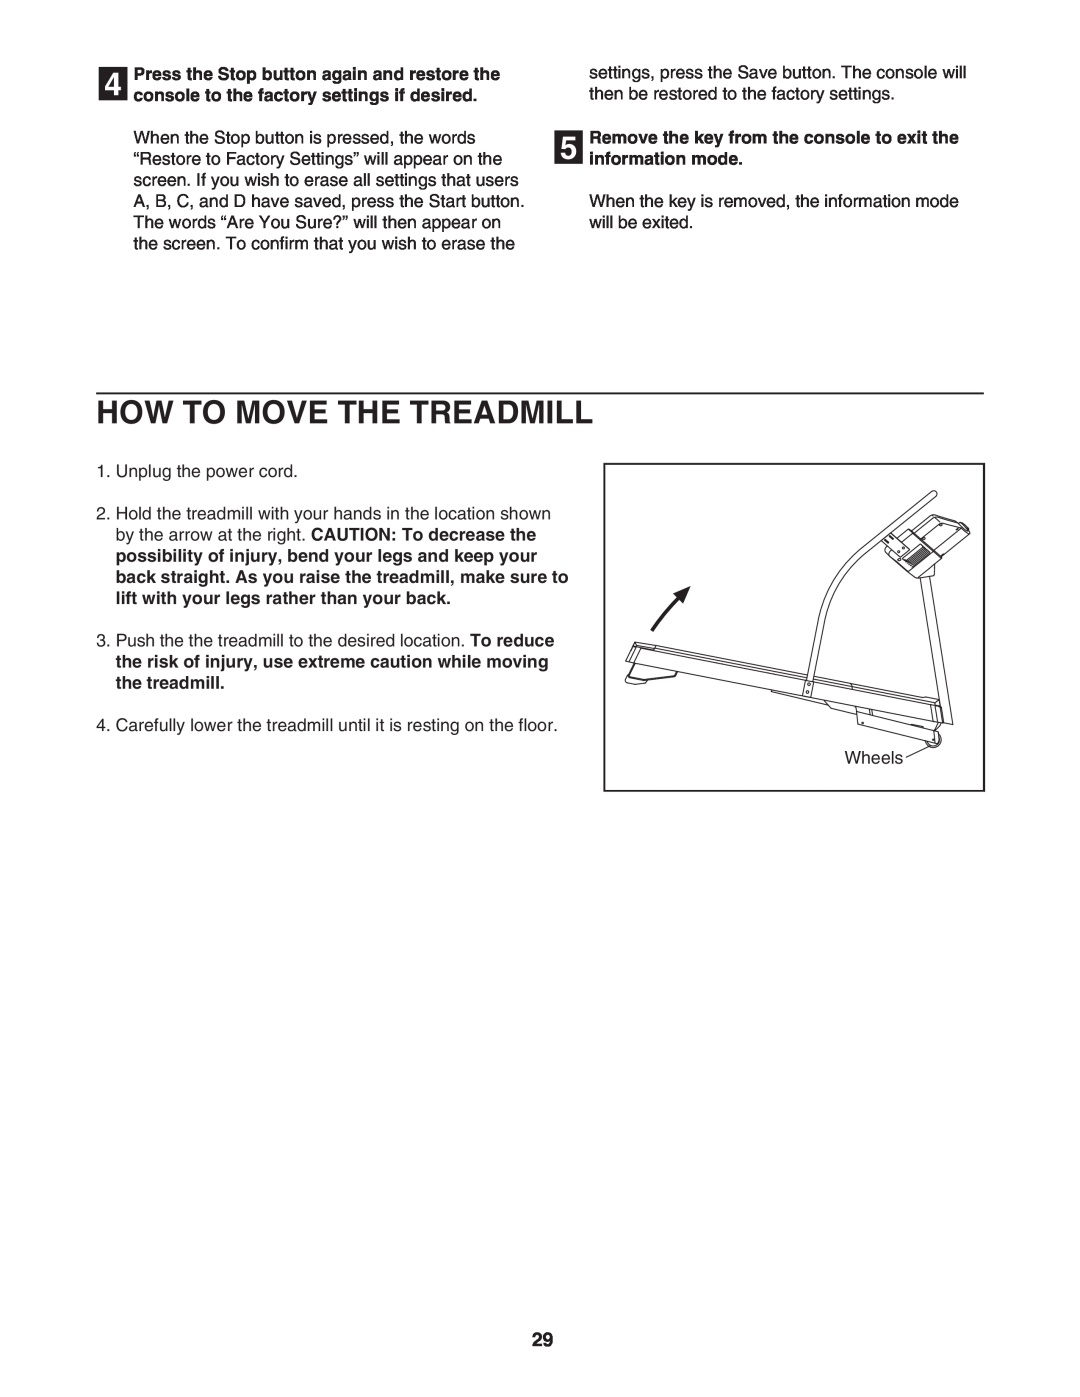 NordicTrack NTL2495.3 manual How To Move The Treadmill, Press the Stop button again and restore the, information mode 